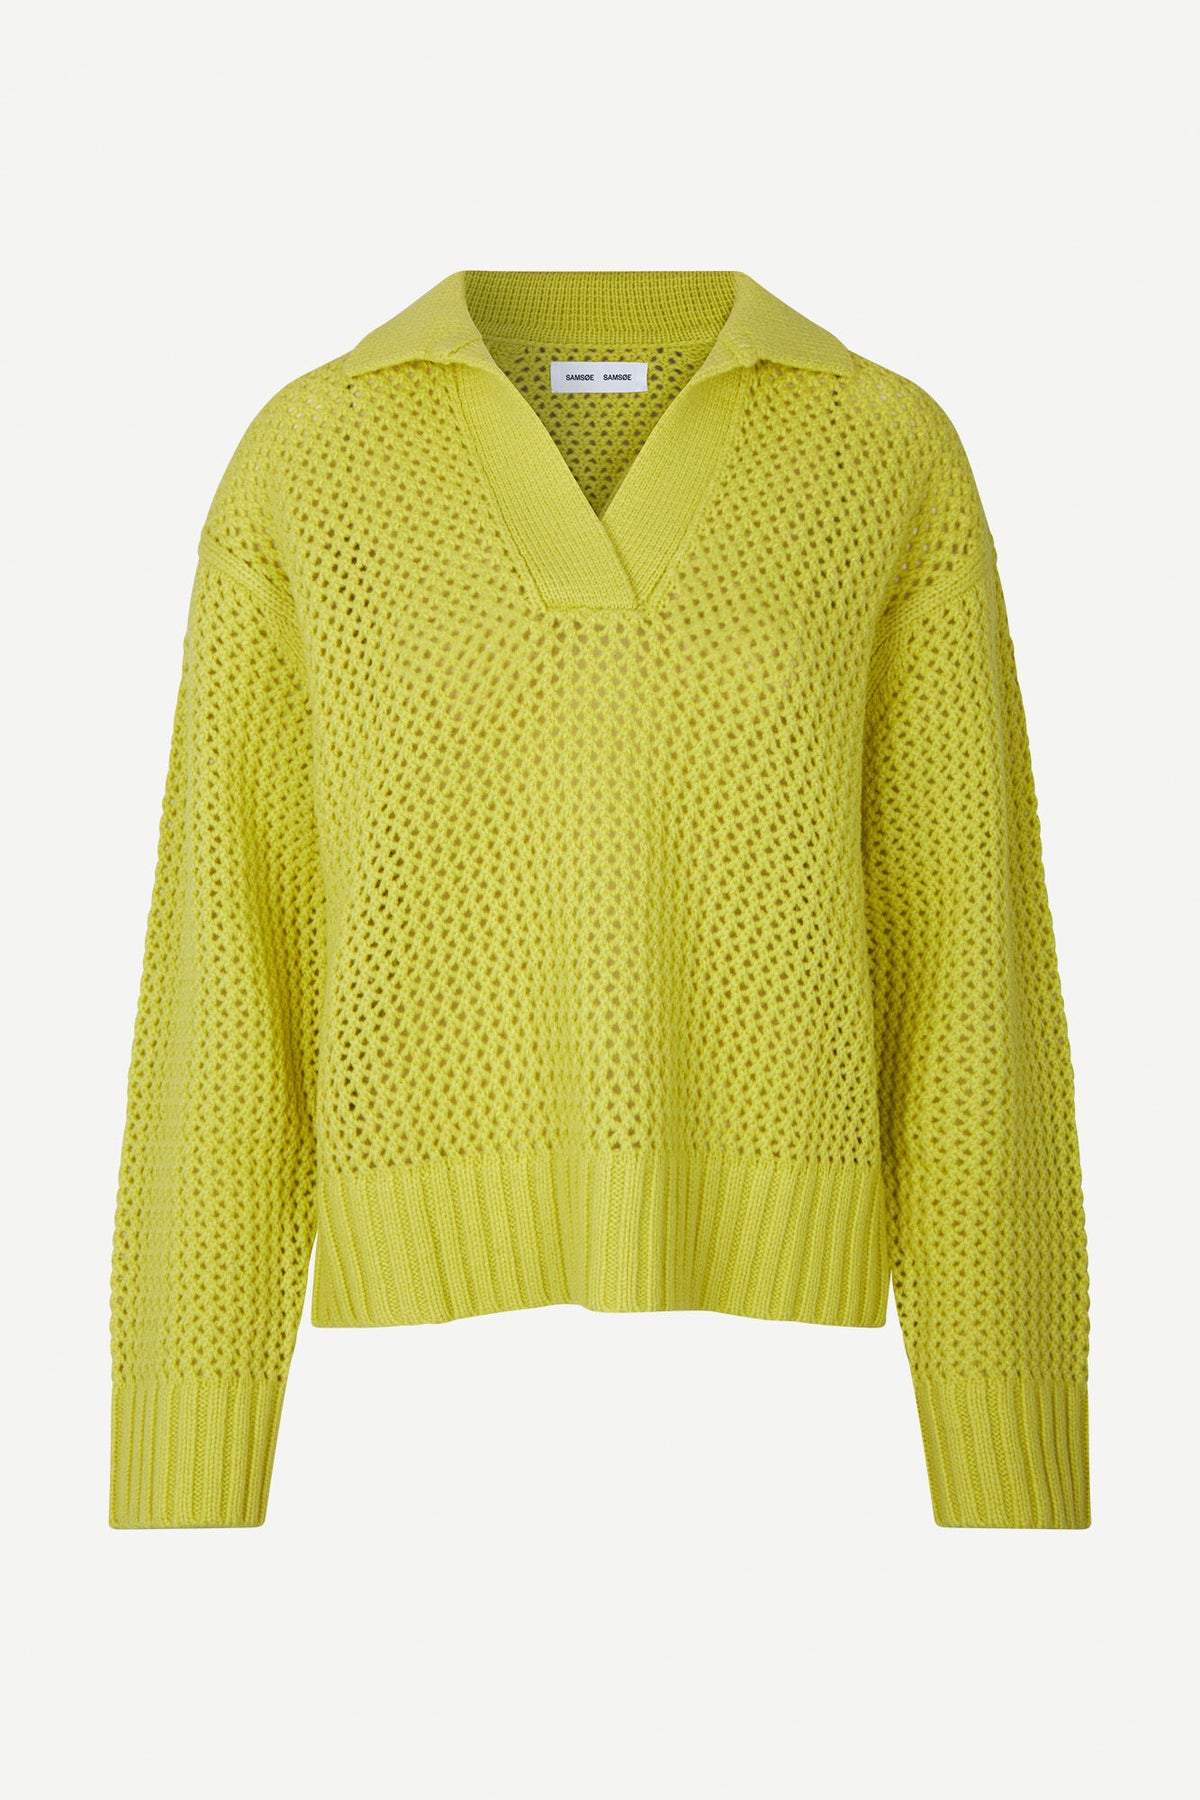 Acid green fisherman's knitted polo jumper with long sleeves and ribbed cuffs collars and hemA